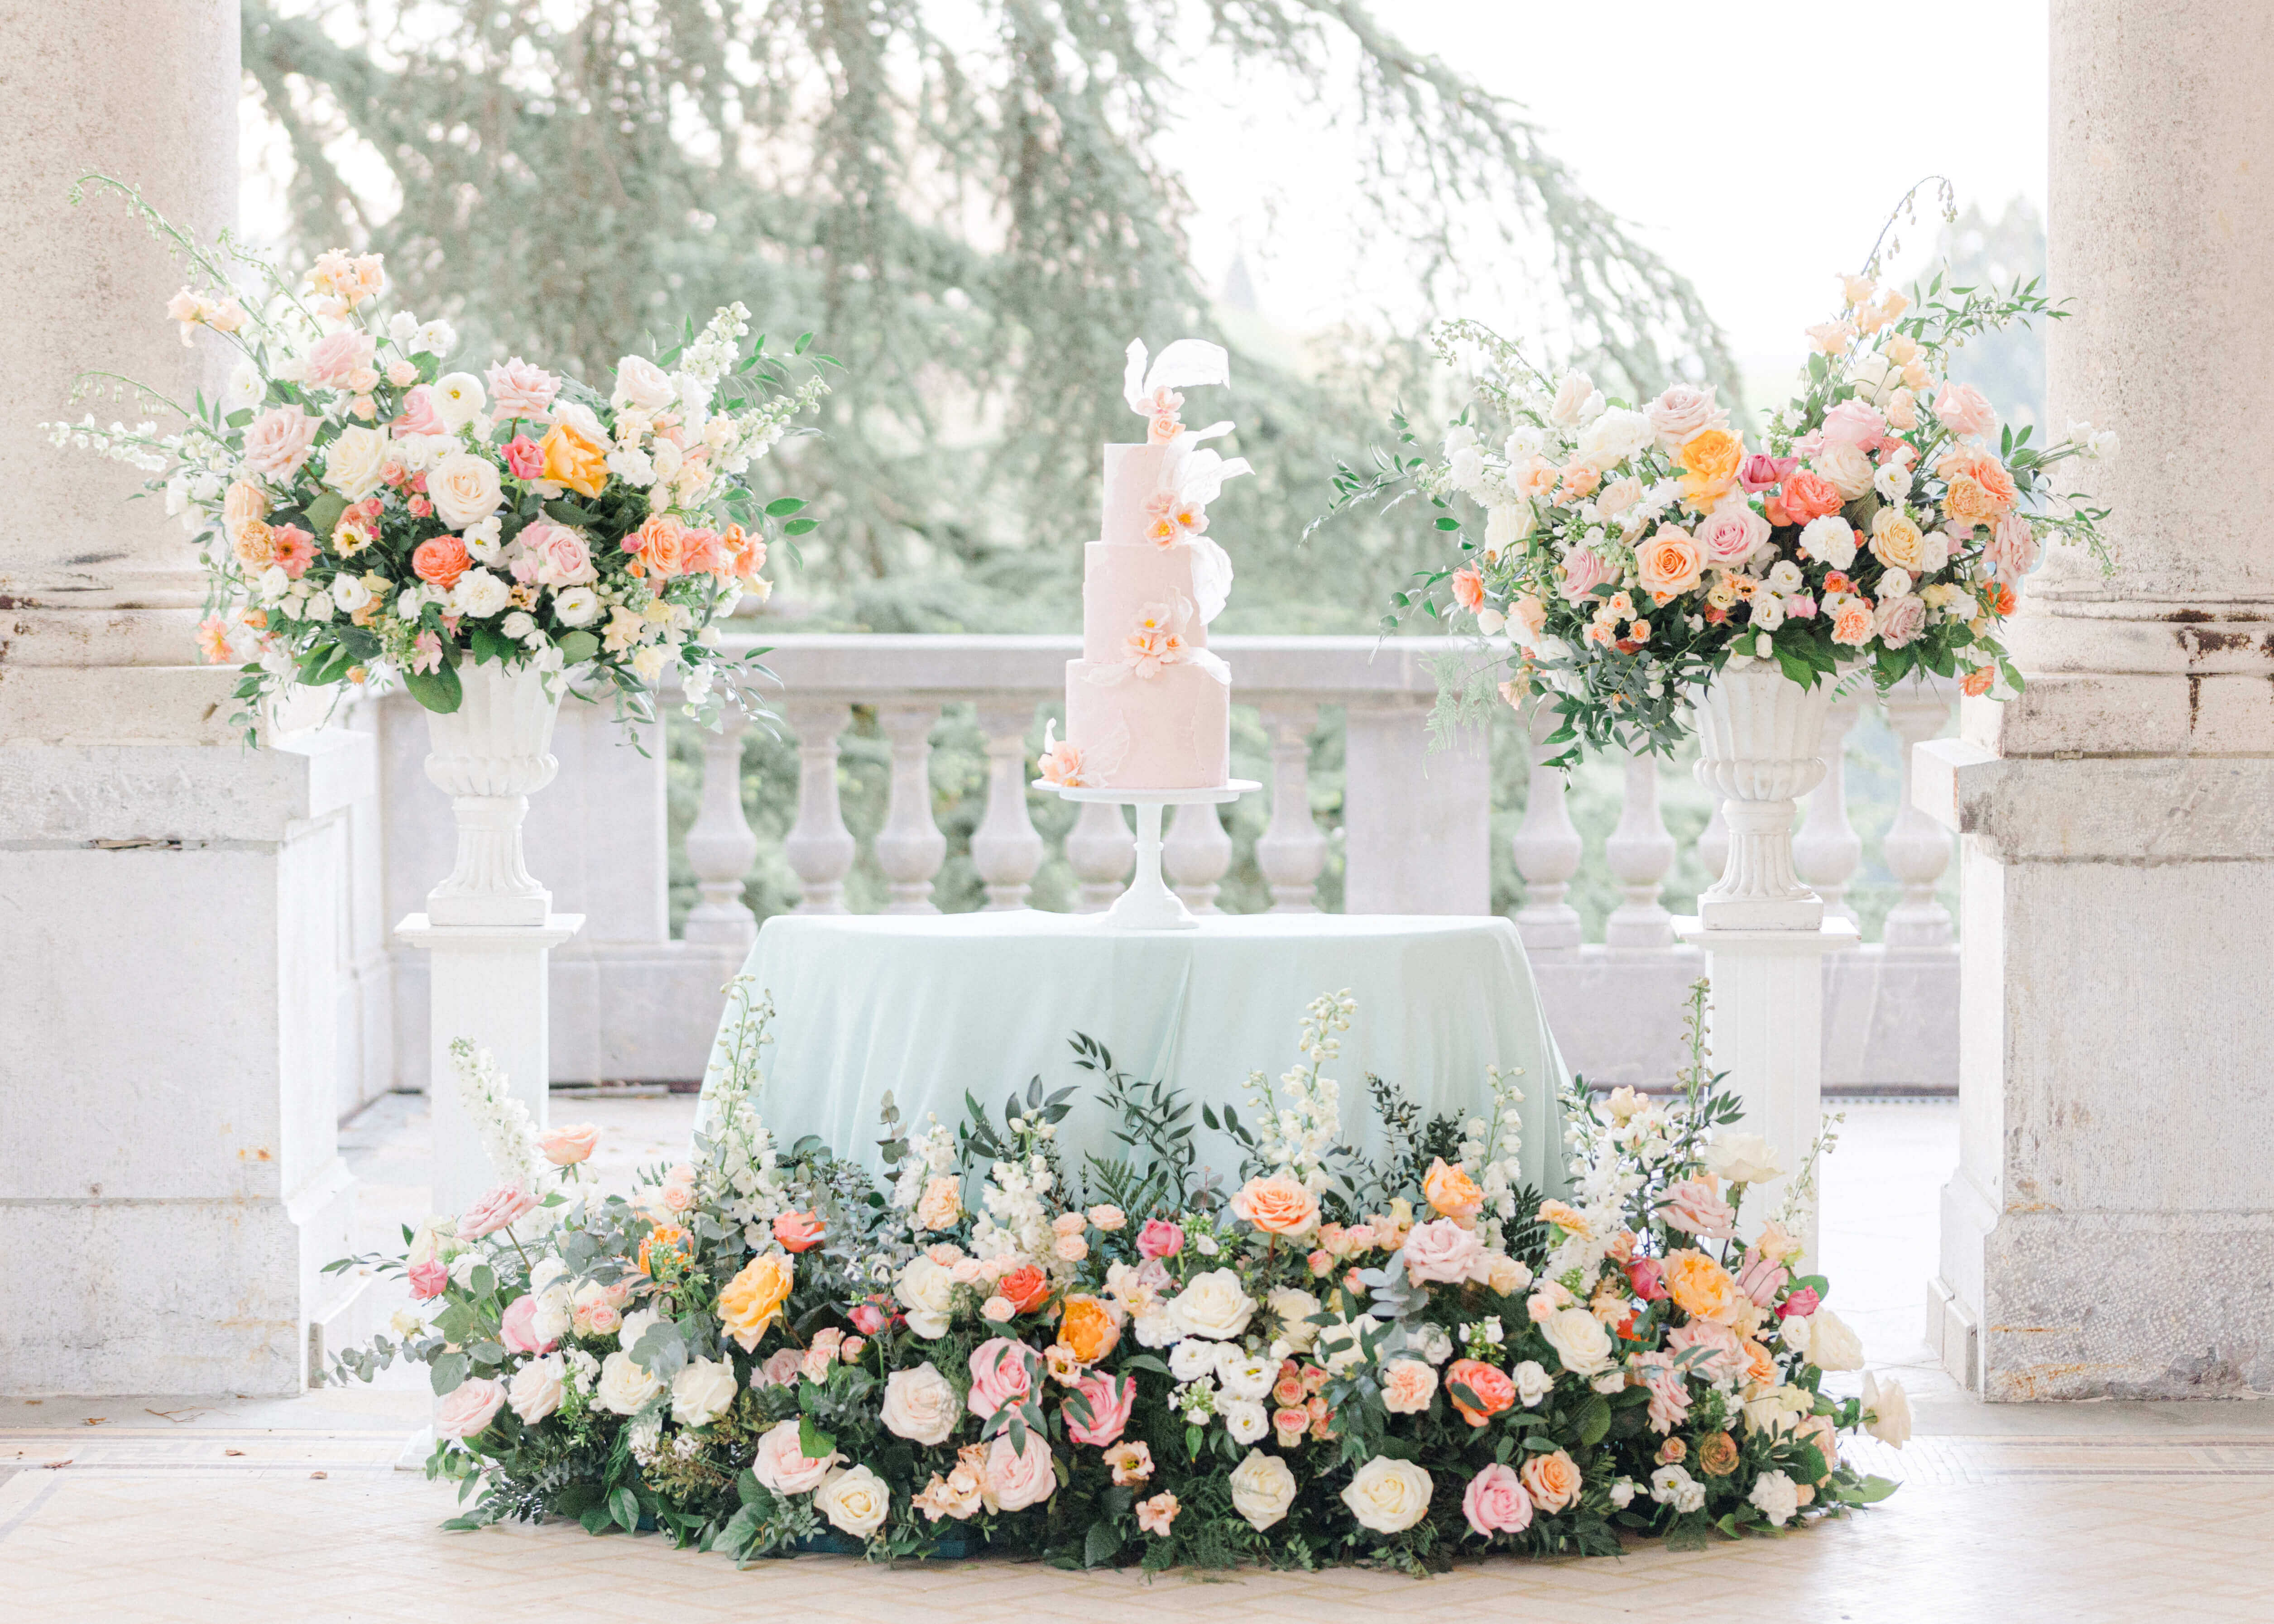  pastel peach cake under a terrace at chateau bouffemont.  the cake is sitting on a table covered by mint linen, surrounded by pastel pink, peach and cream floral meadows and and on both sides 2 plinths with similar florals